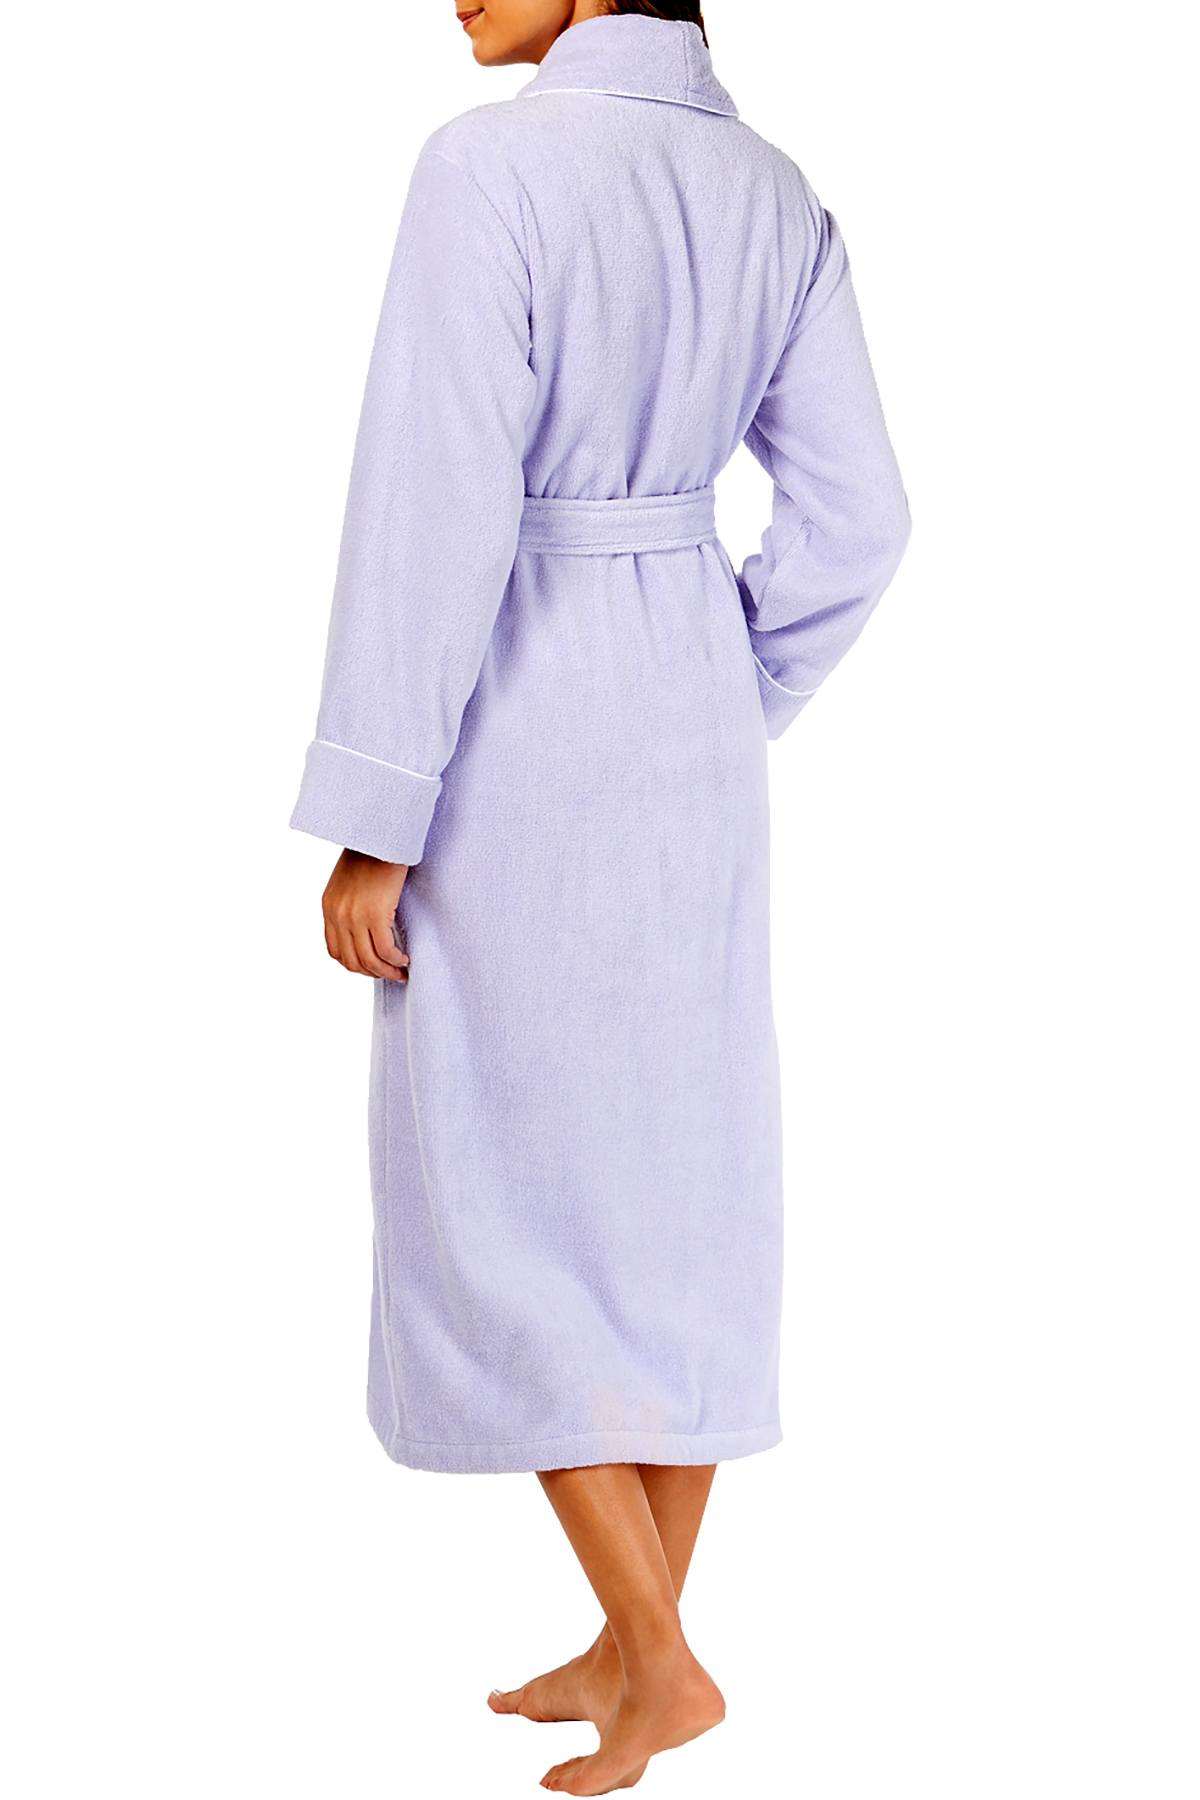 Charter Club Intimates LightAmethyst Luxe Terry Piped Wrap Robe